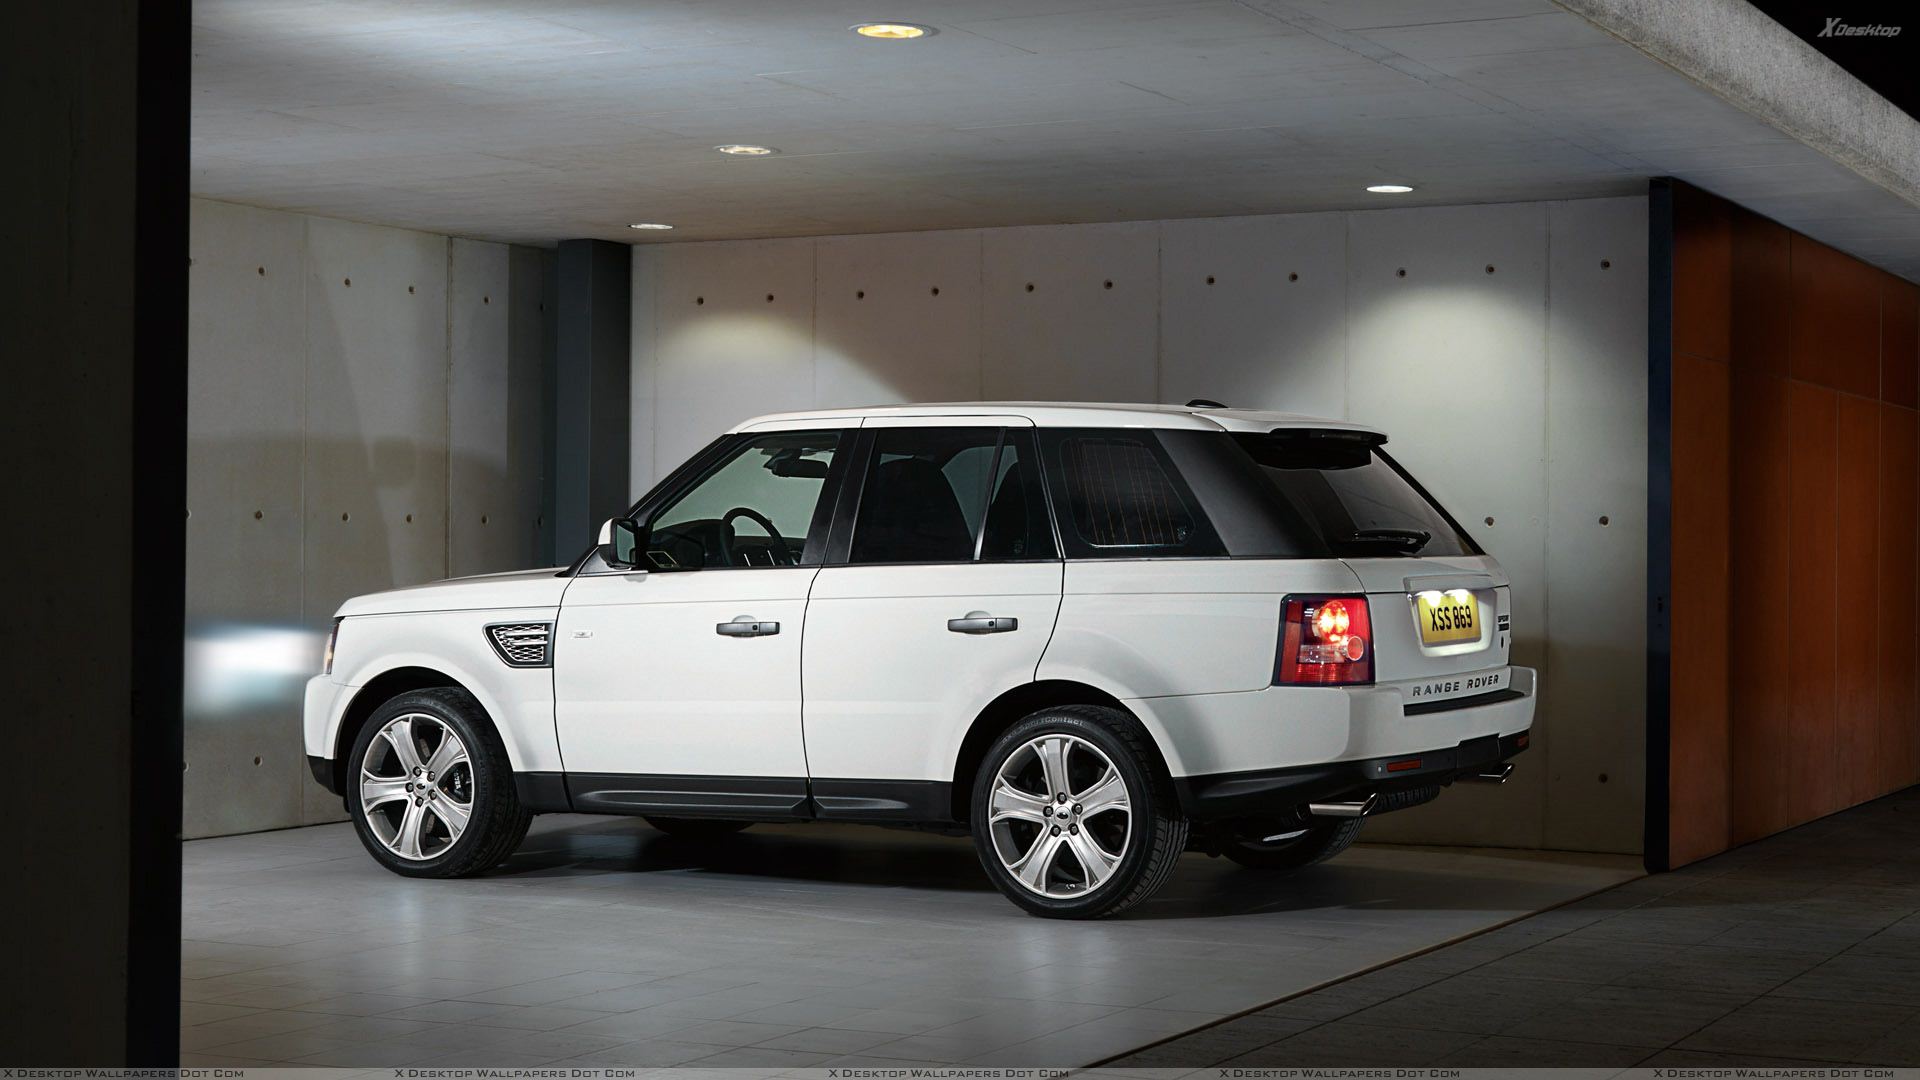 2010 White Range Rover Sport Supercharged - HD Wallpaper 